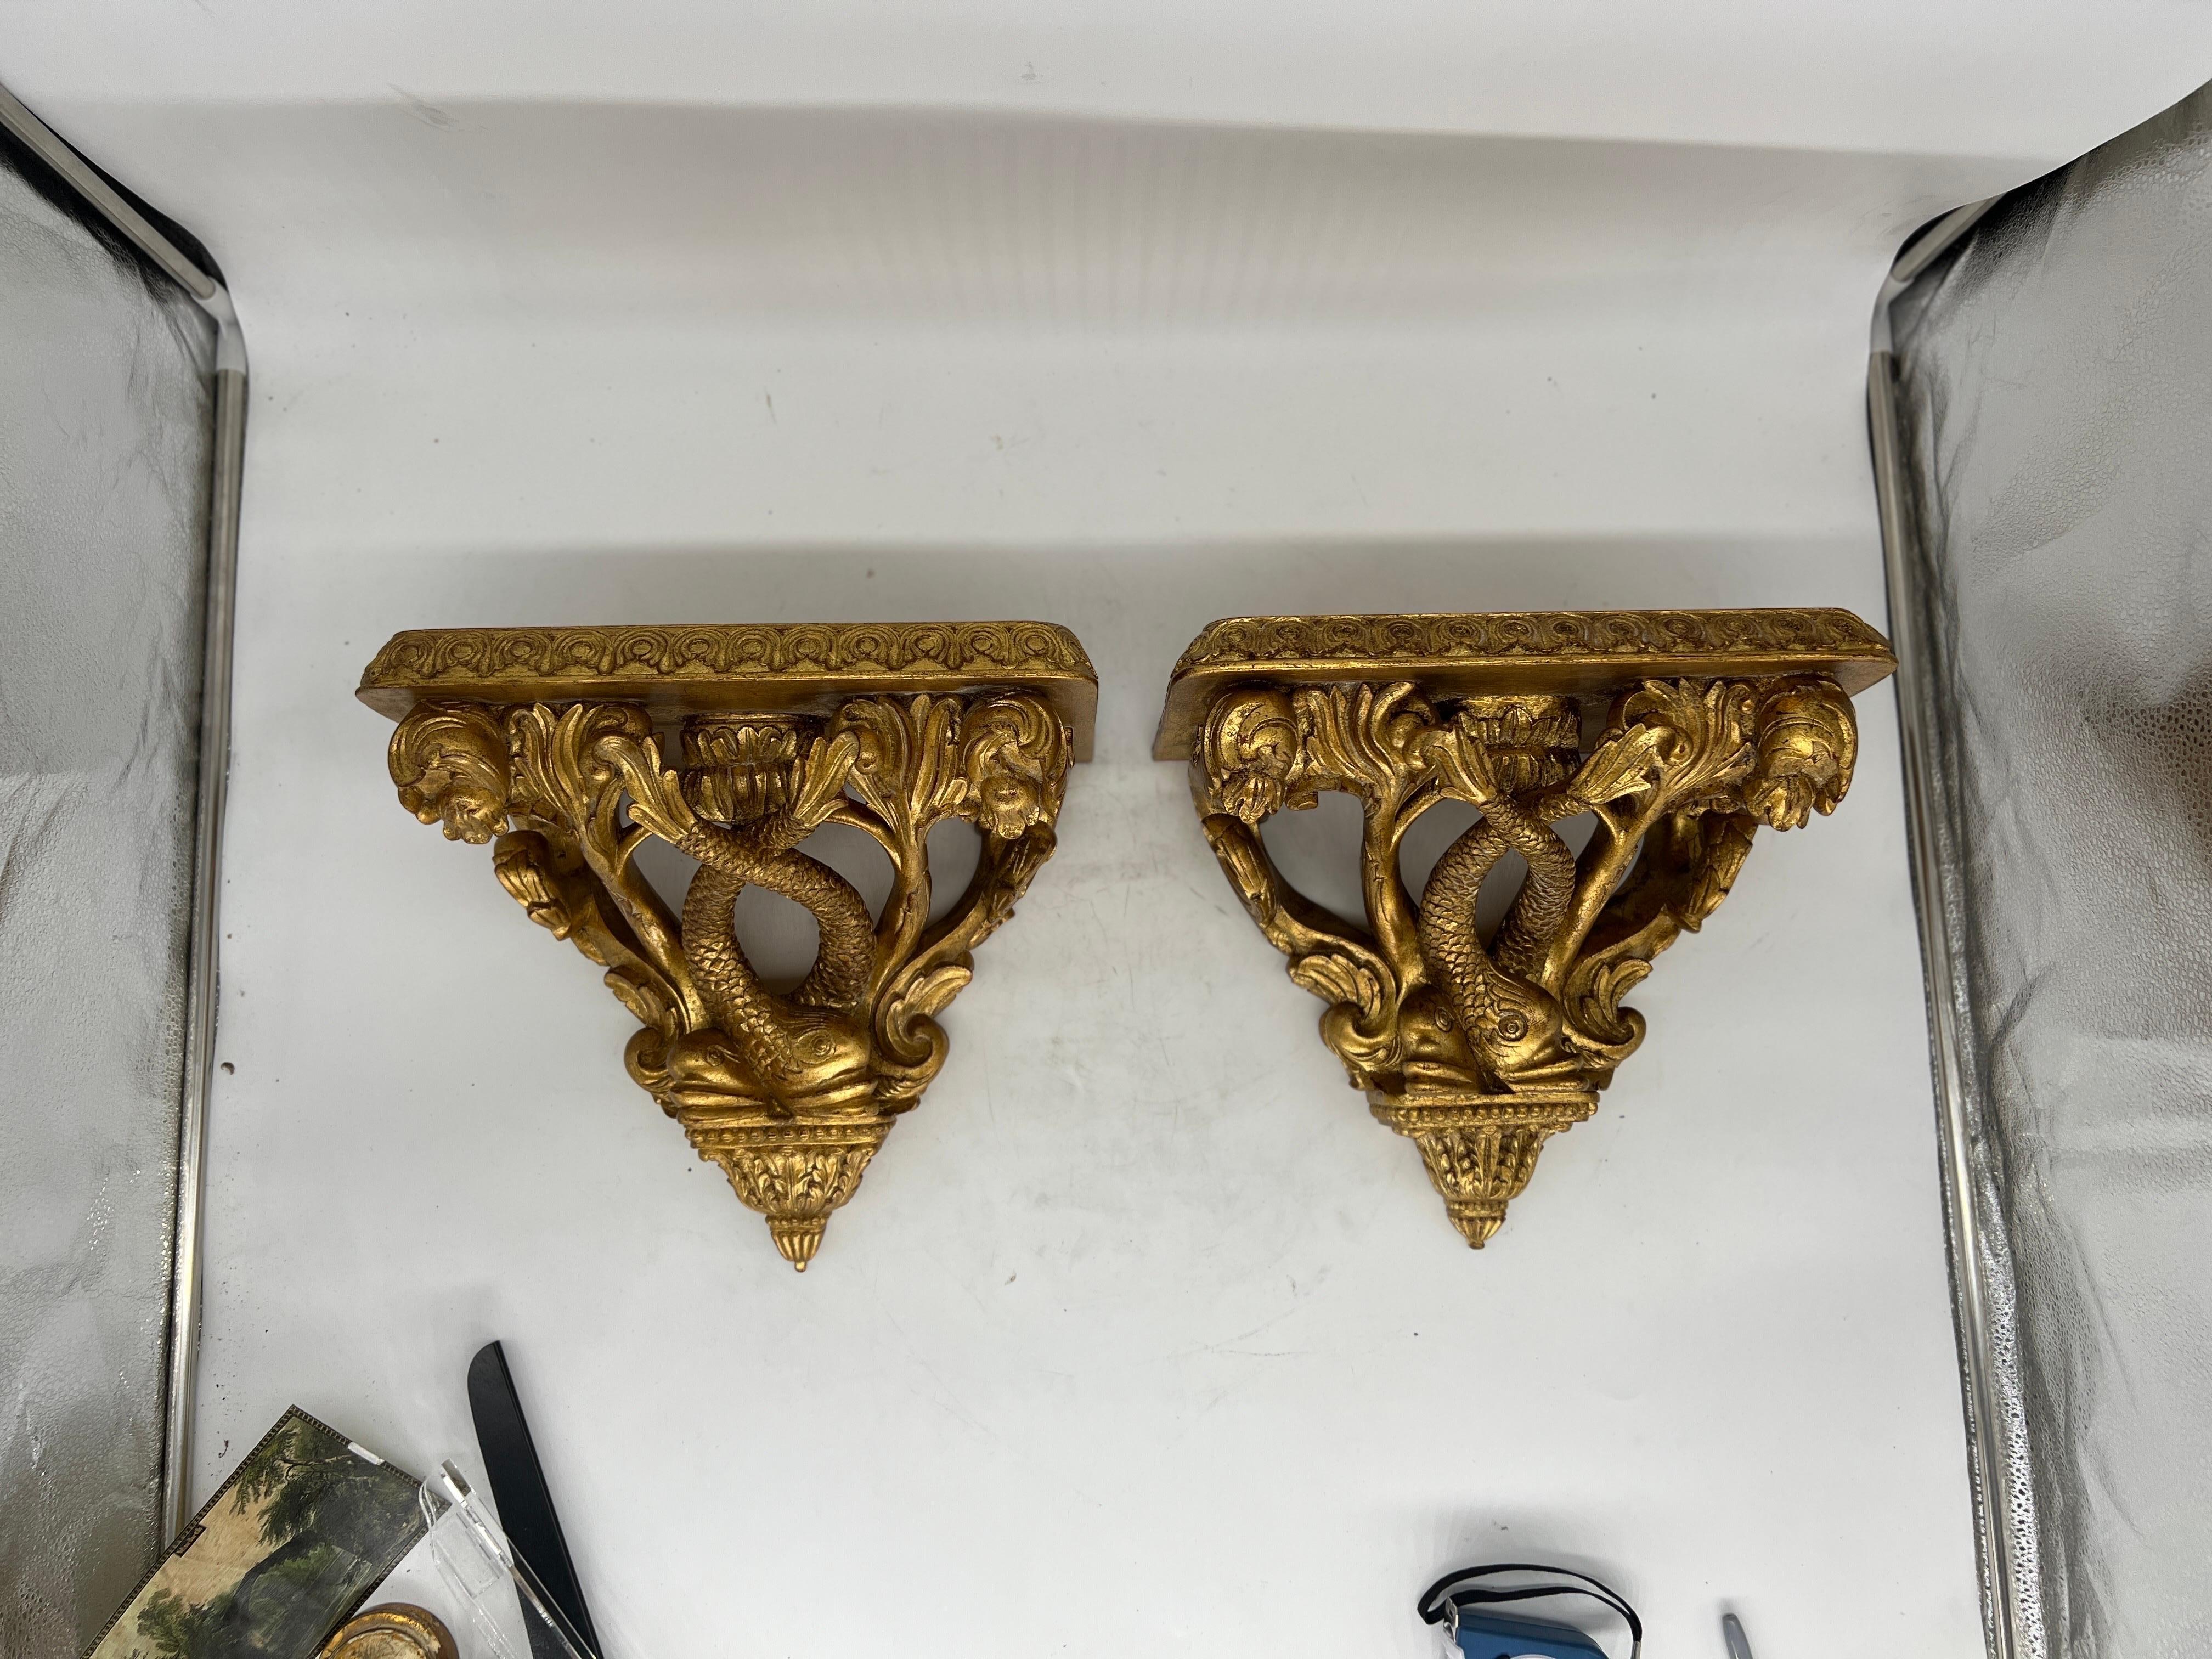 Pair, Maitland Smith Regency Style Gilt Decorated Dolphin Form Wall Brackets

Each bracket has an excellent regency style appearance with gilt dolphin supports. Marked to verso. 